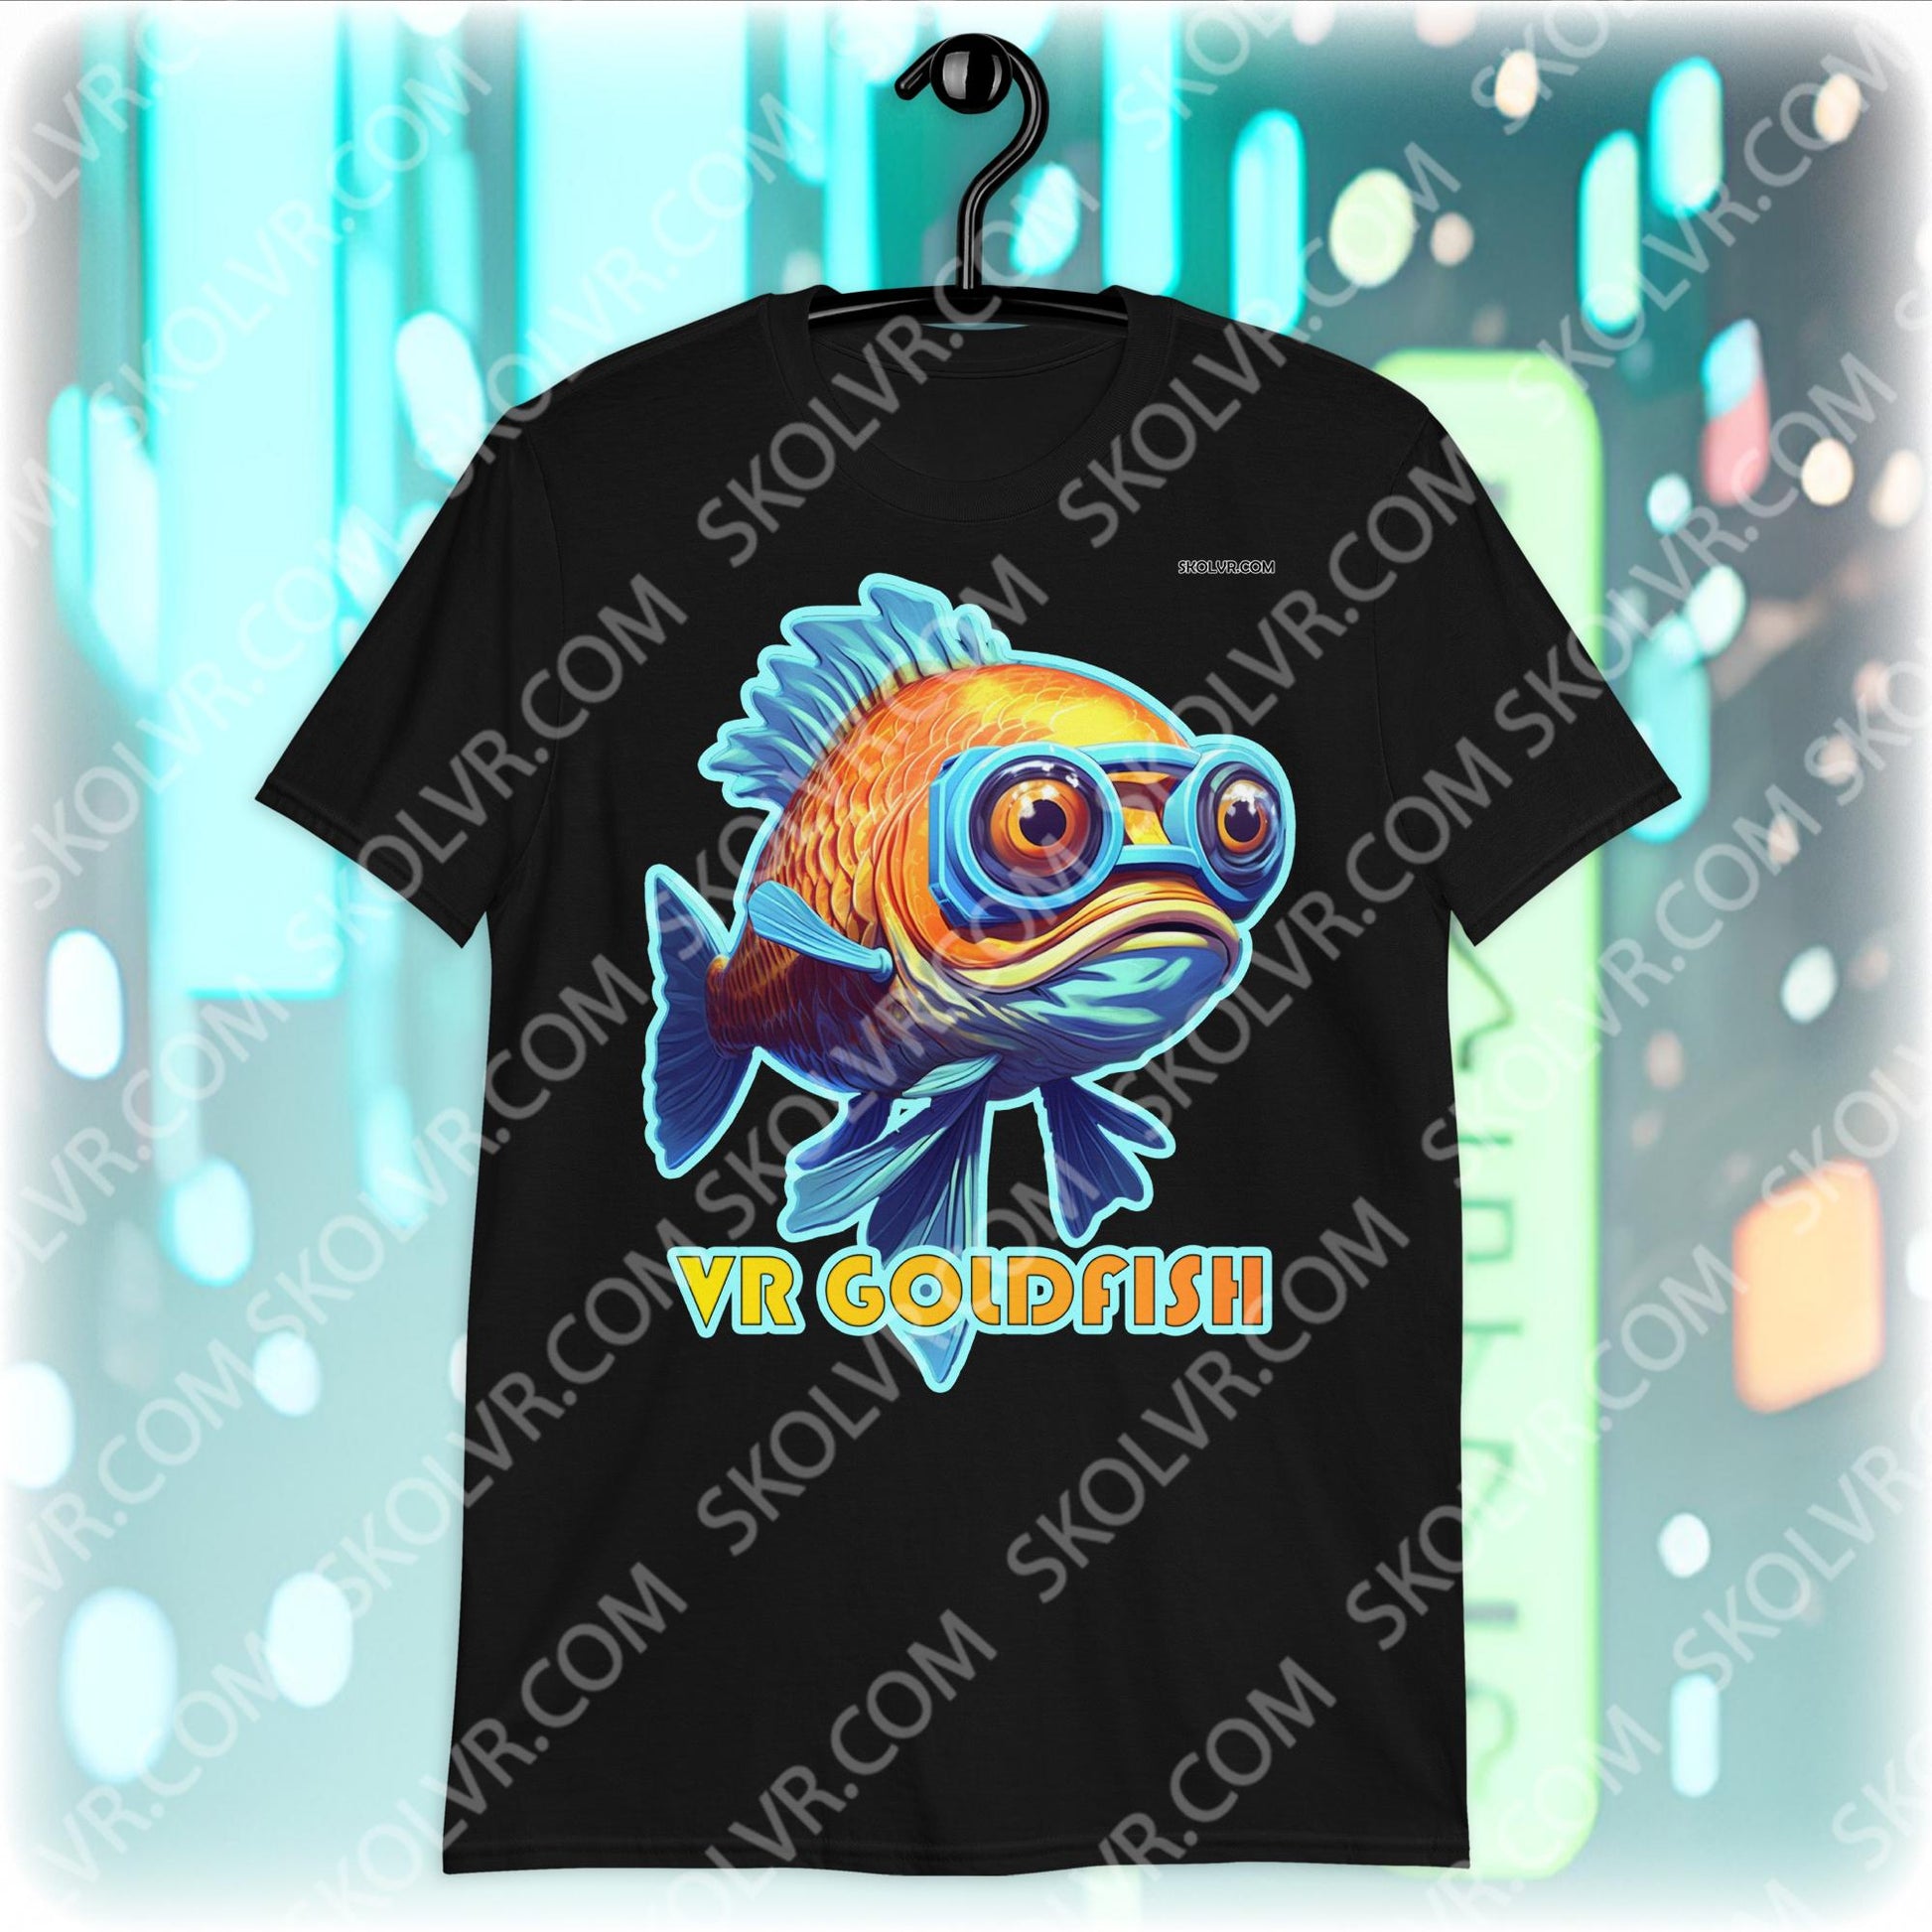 VR goldfish. Unique design VR golgfish funny and colorful photo print at tshirt. Feel yourself as an owner of goldfish wearing vr headset. 